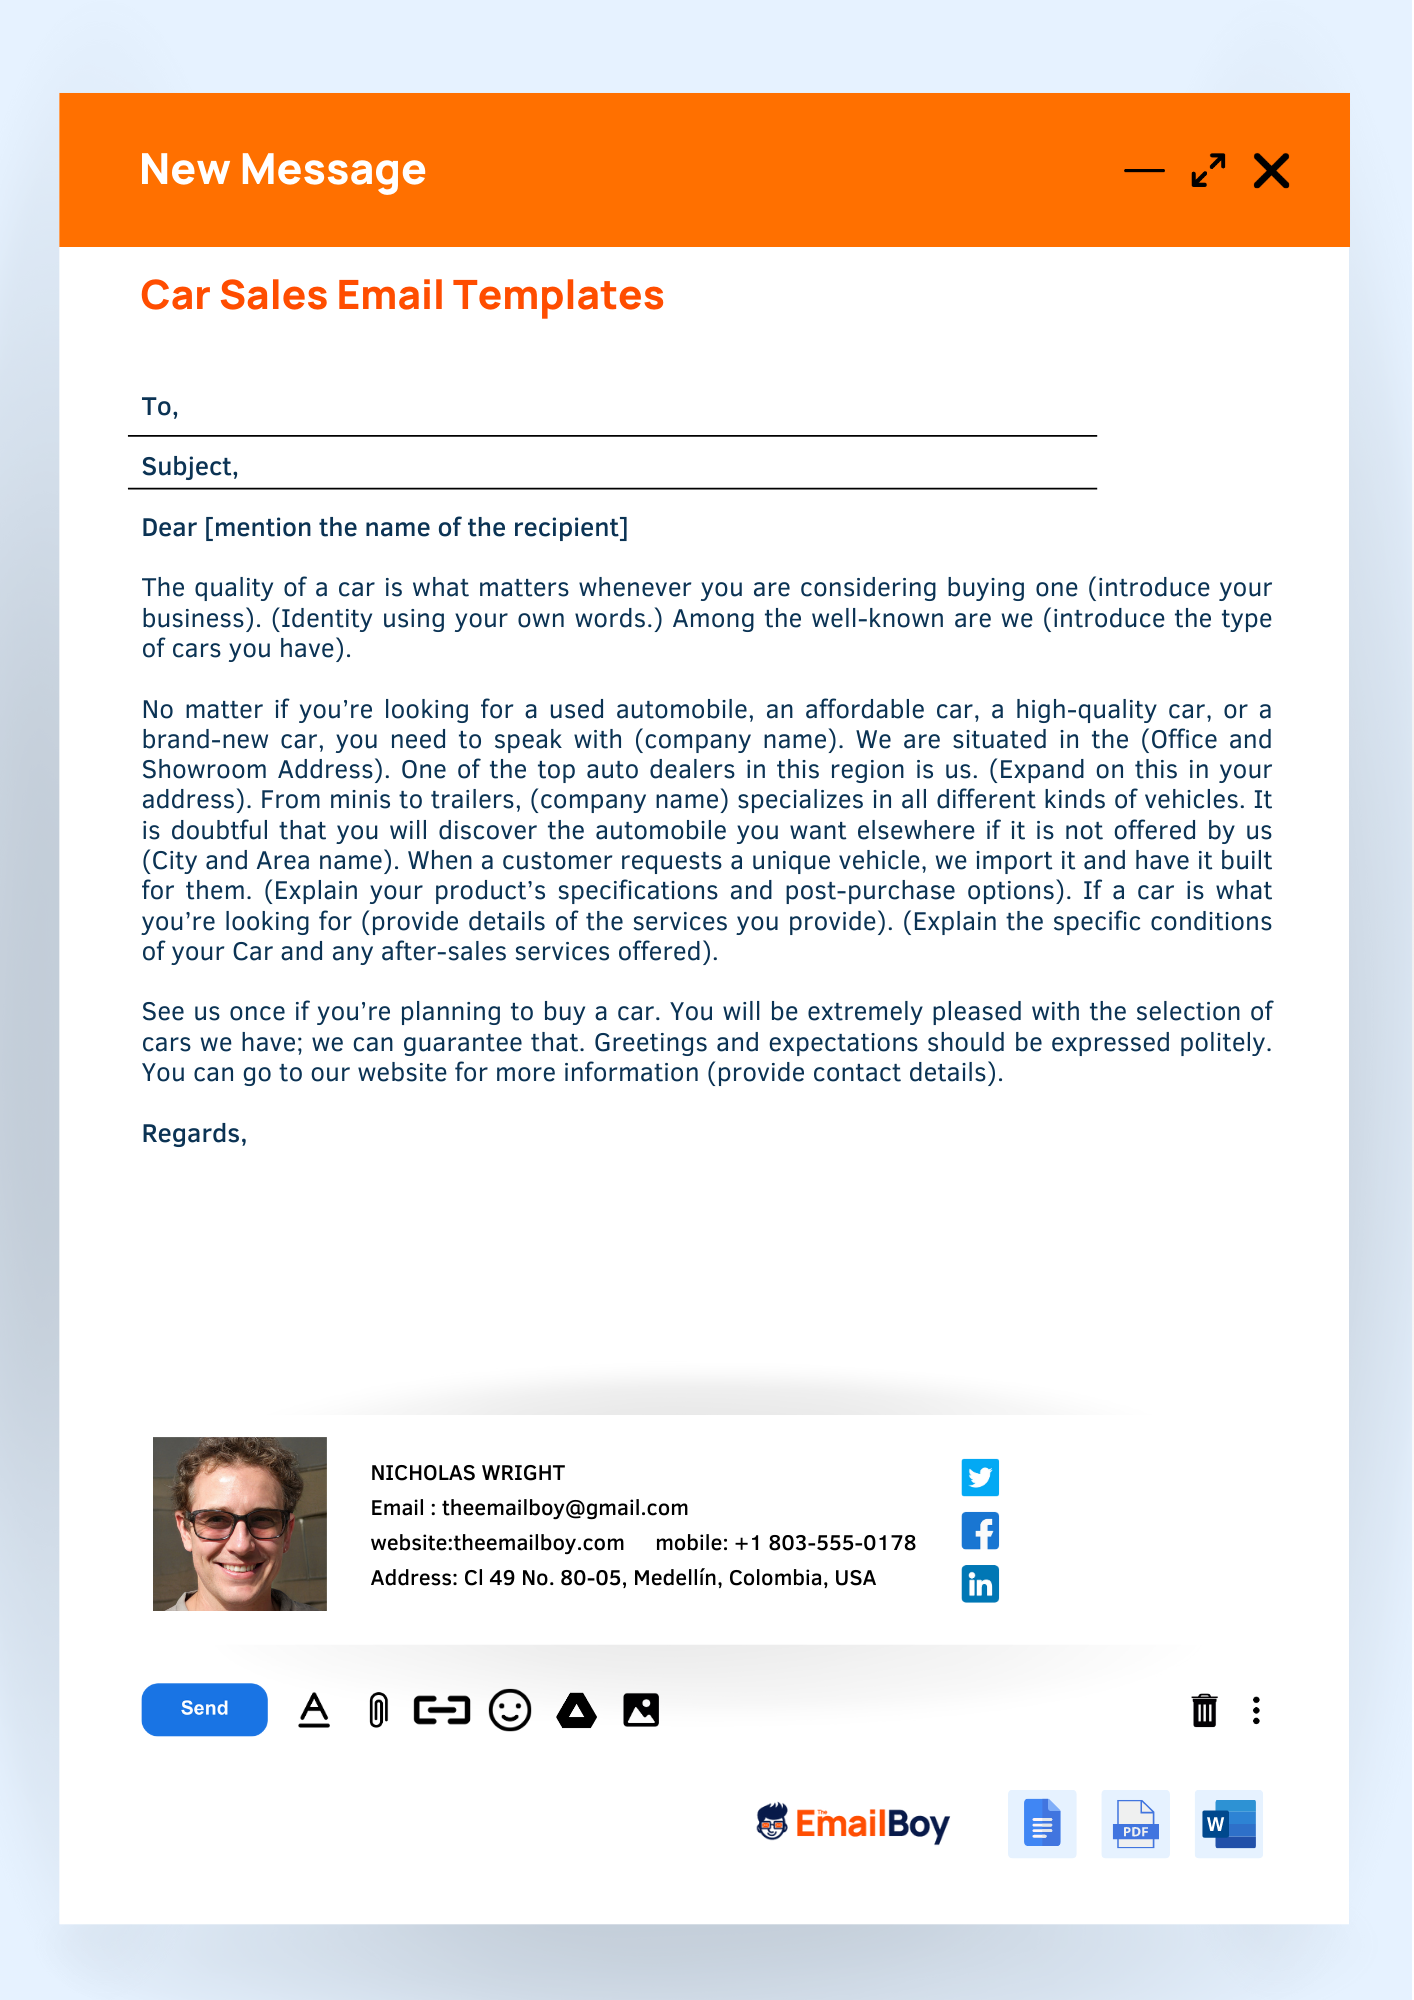 Car Sales Email Templates: 5  Examples (Copy and Paste)